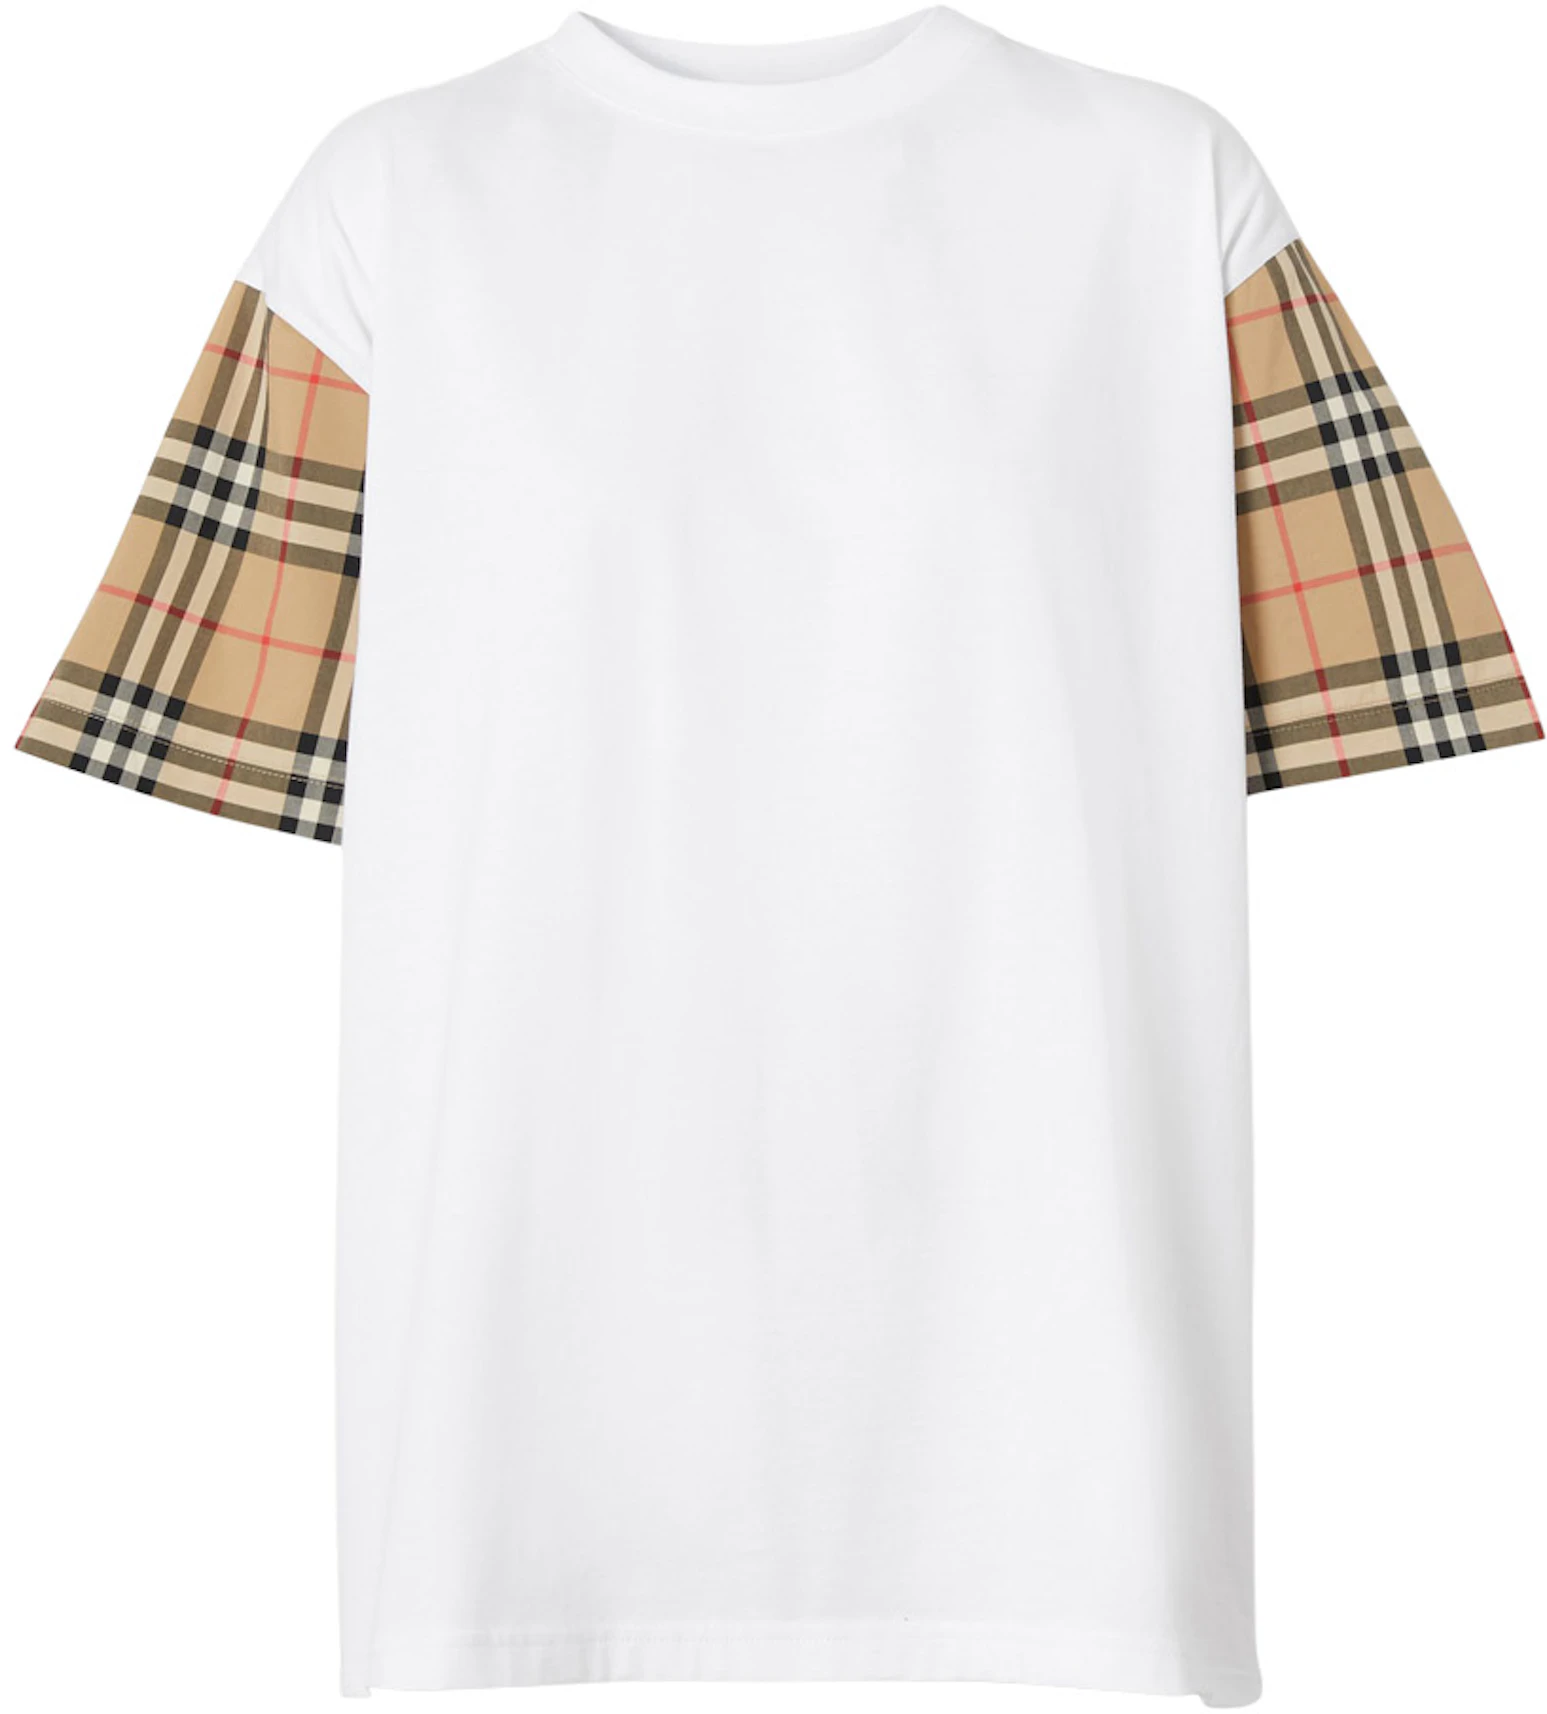 Burberry Vintage Check Sleeve Cotton Oversized T-Shirt White/Archive ...